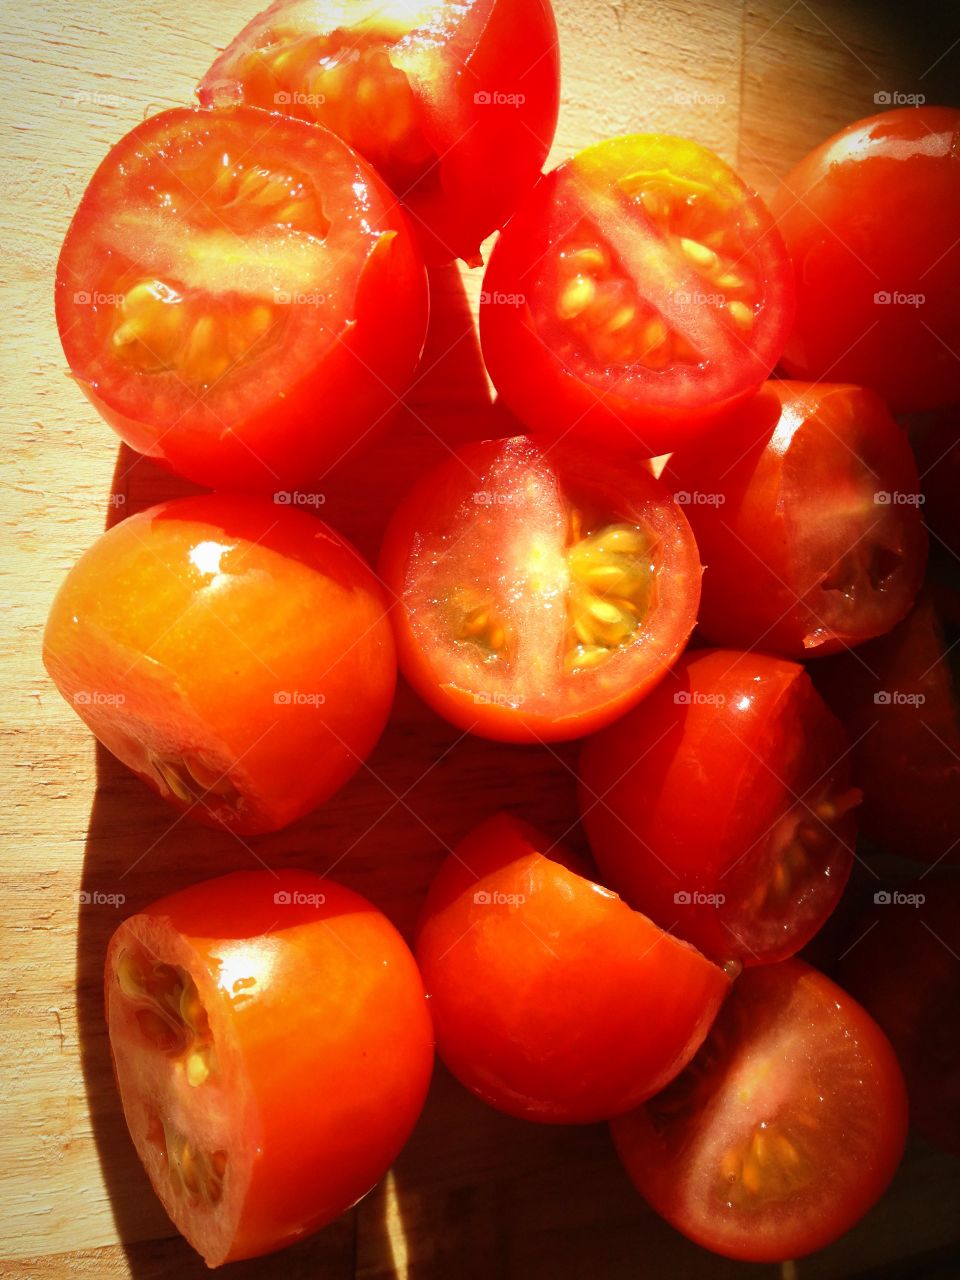 Red tomatoes 